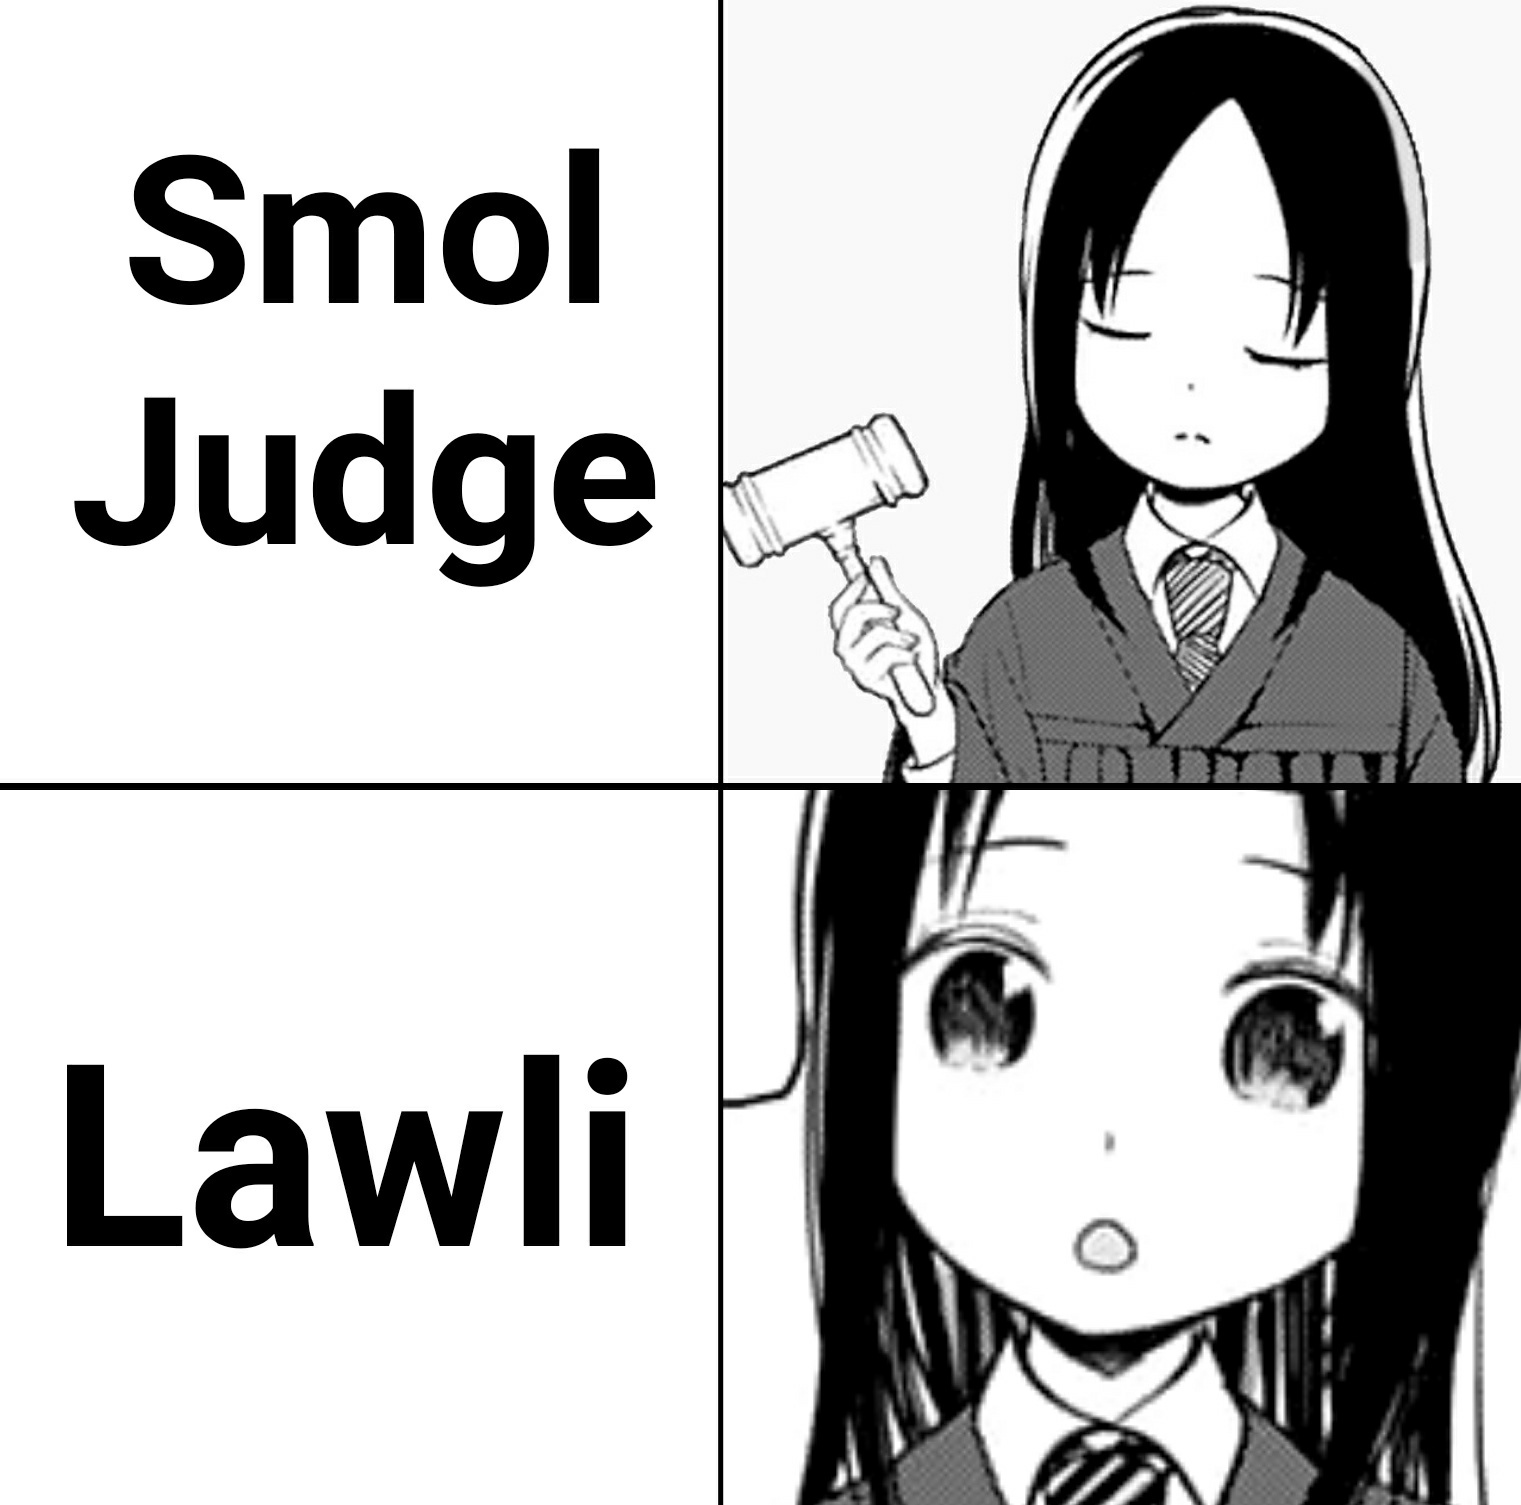 I wanna implement my laws into her colony - meme